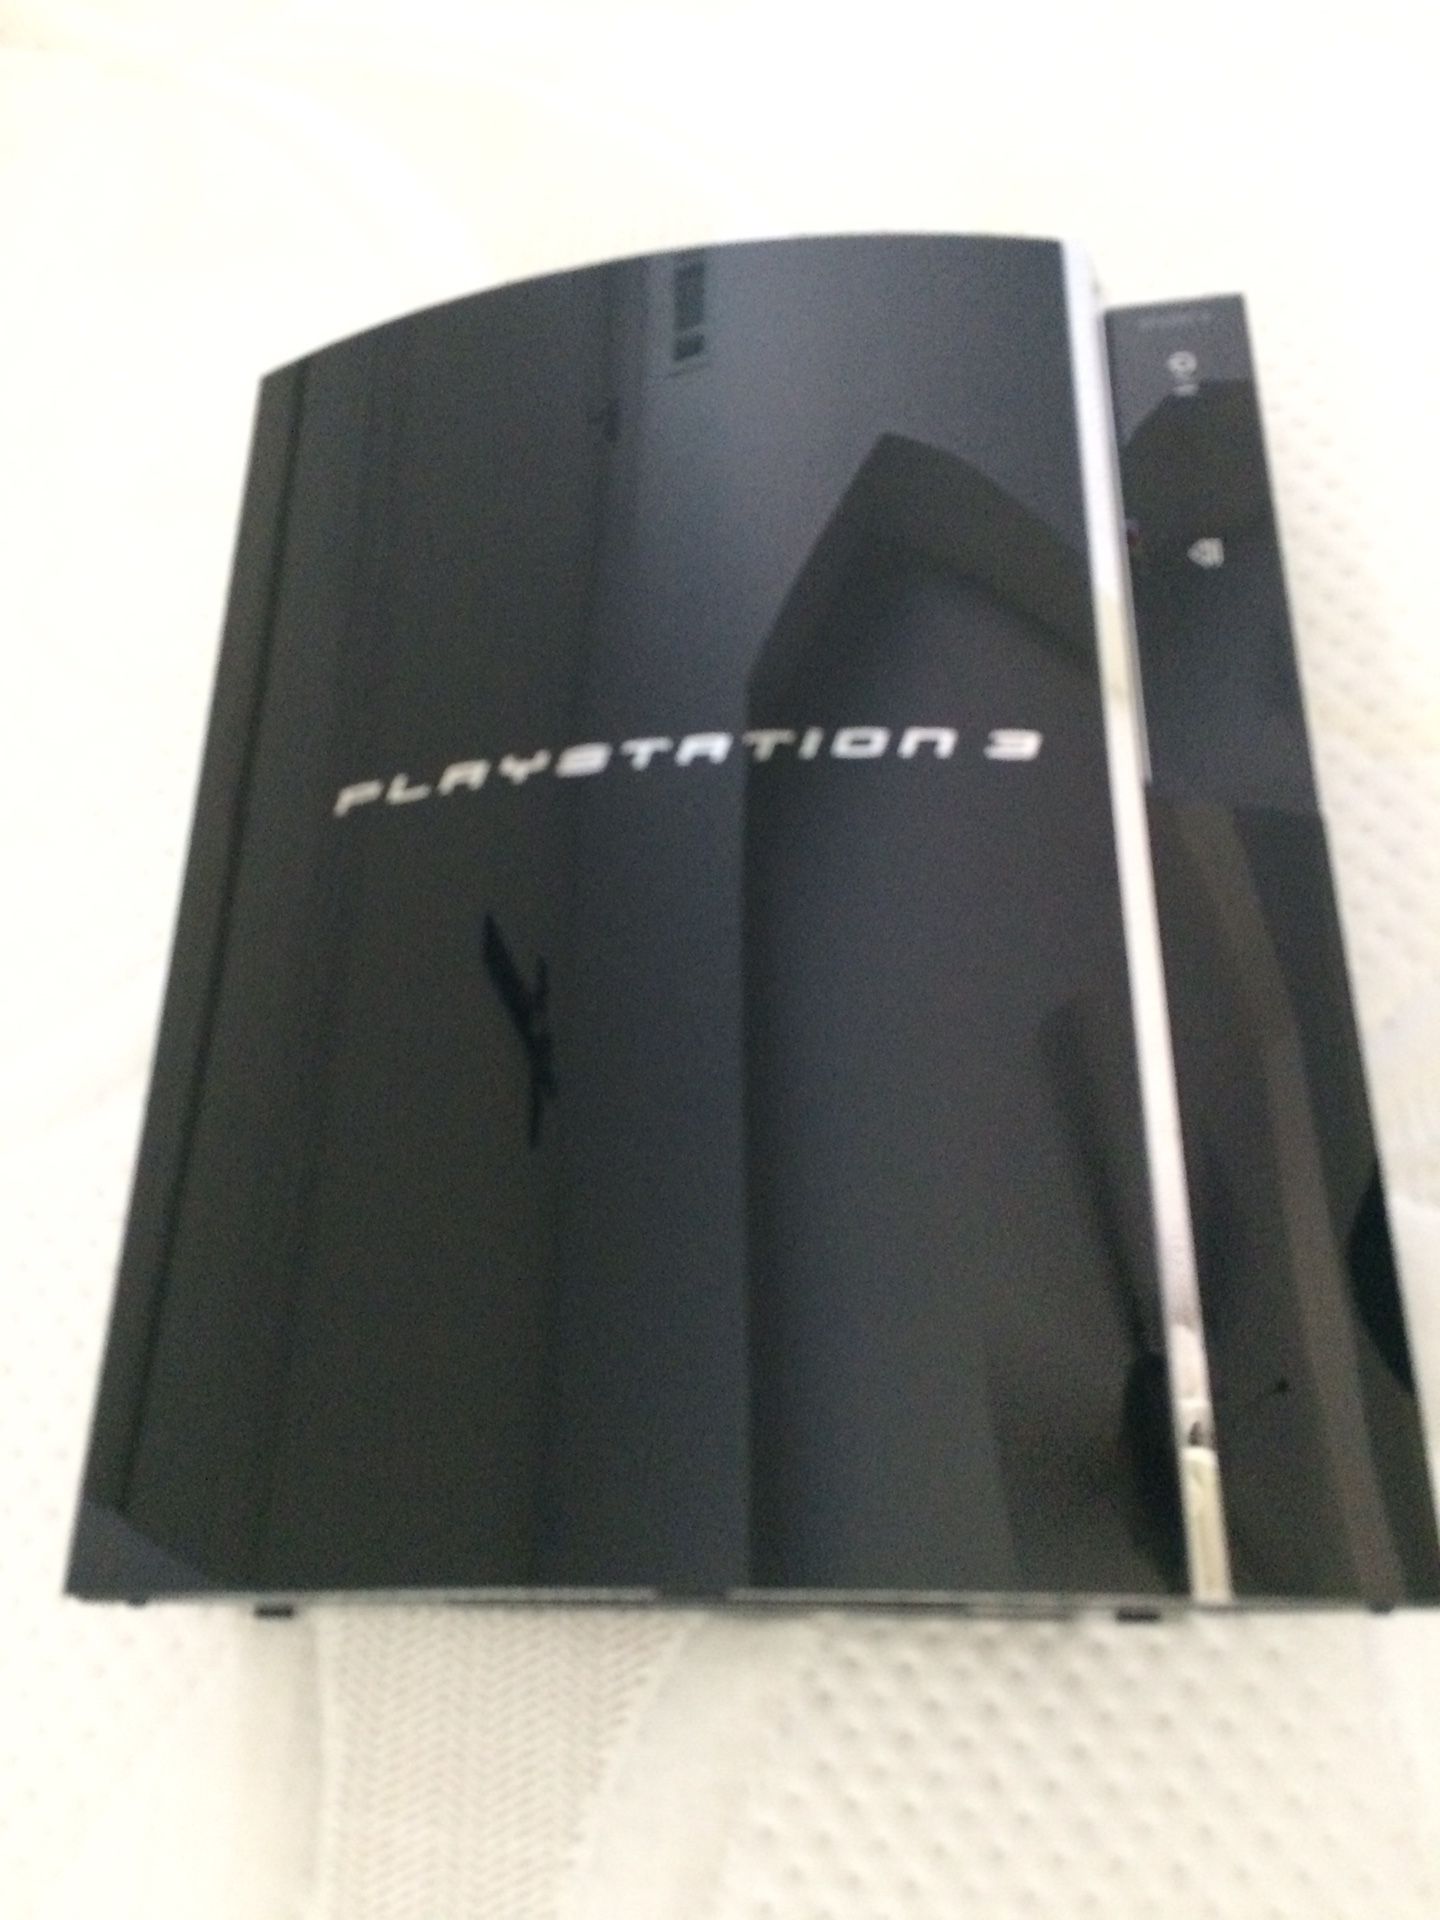 PS3. Especial Edition 60 gb perfect condition 1 controller 9 games blue ray controller